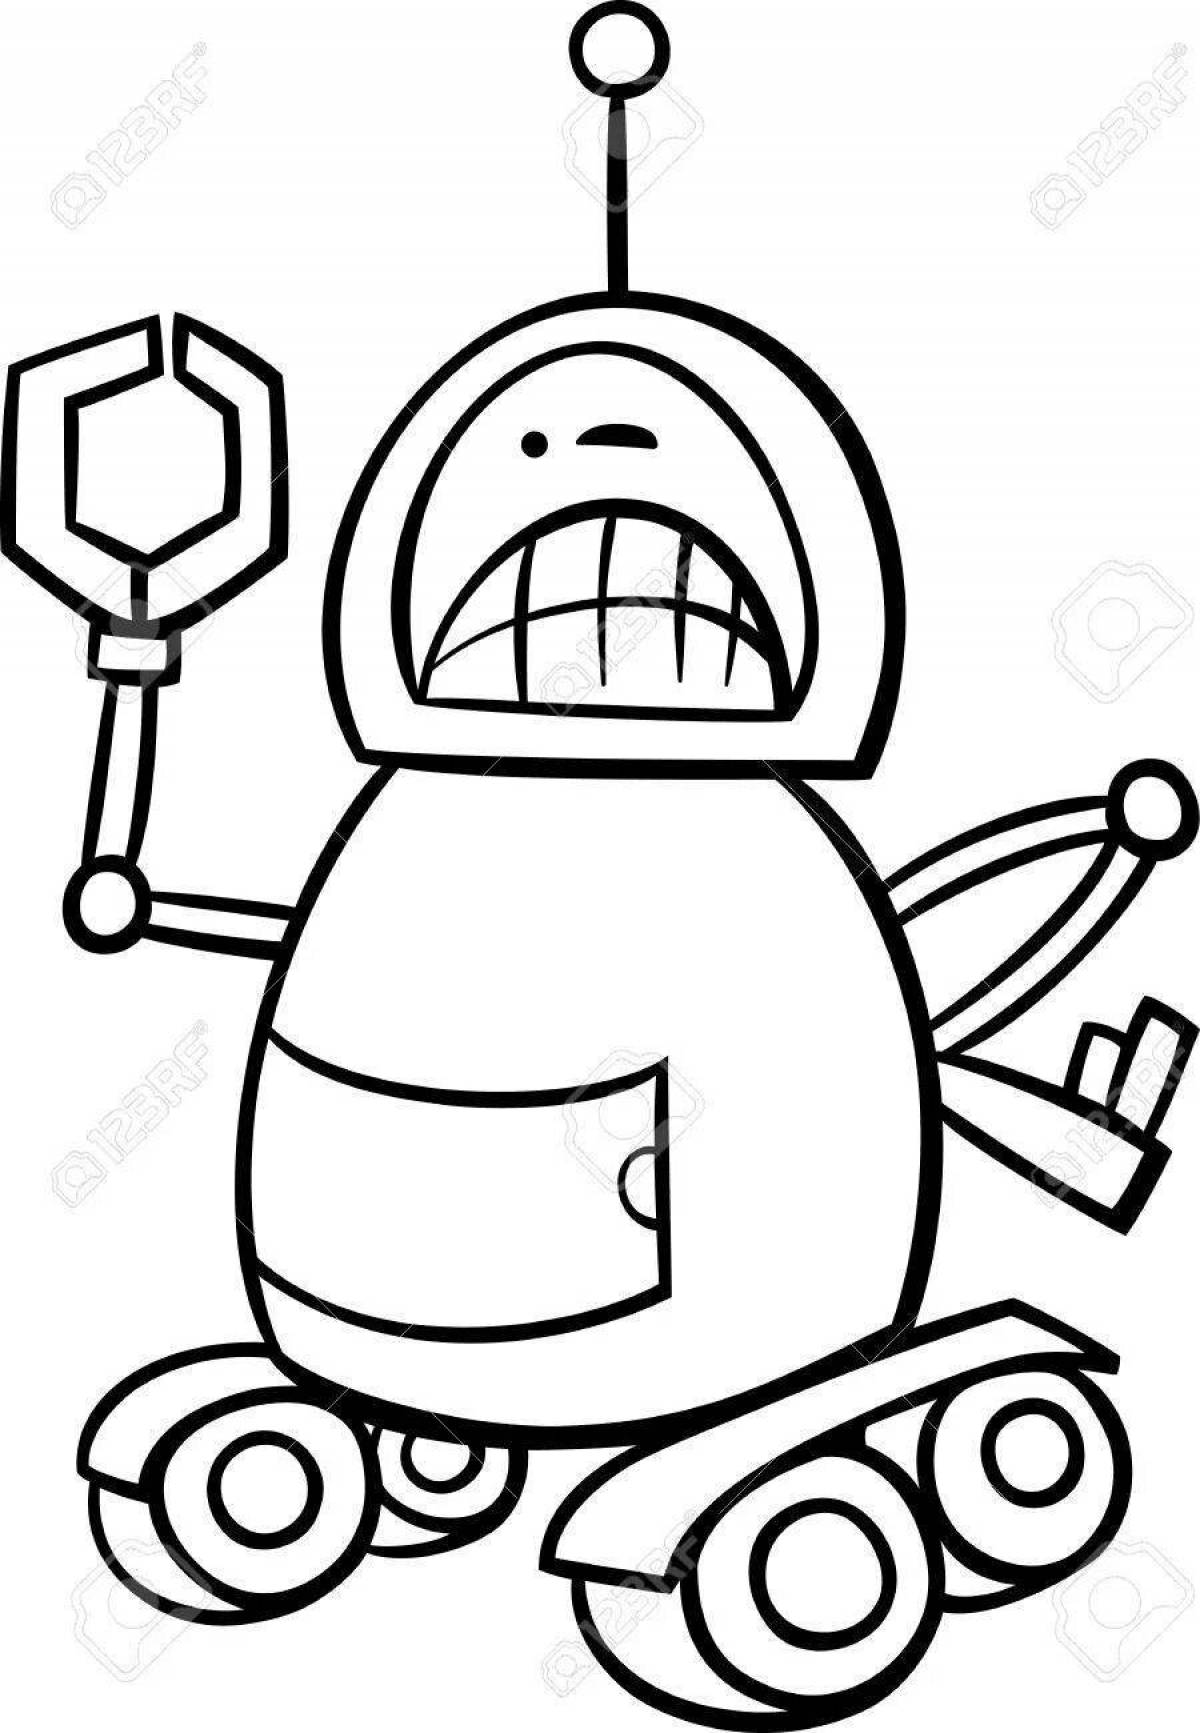 Robot sun coloring page